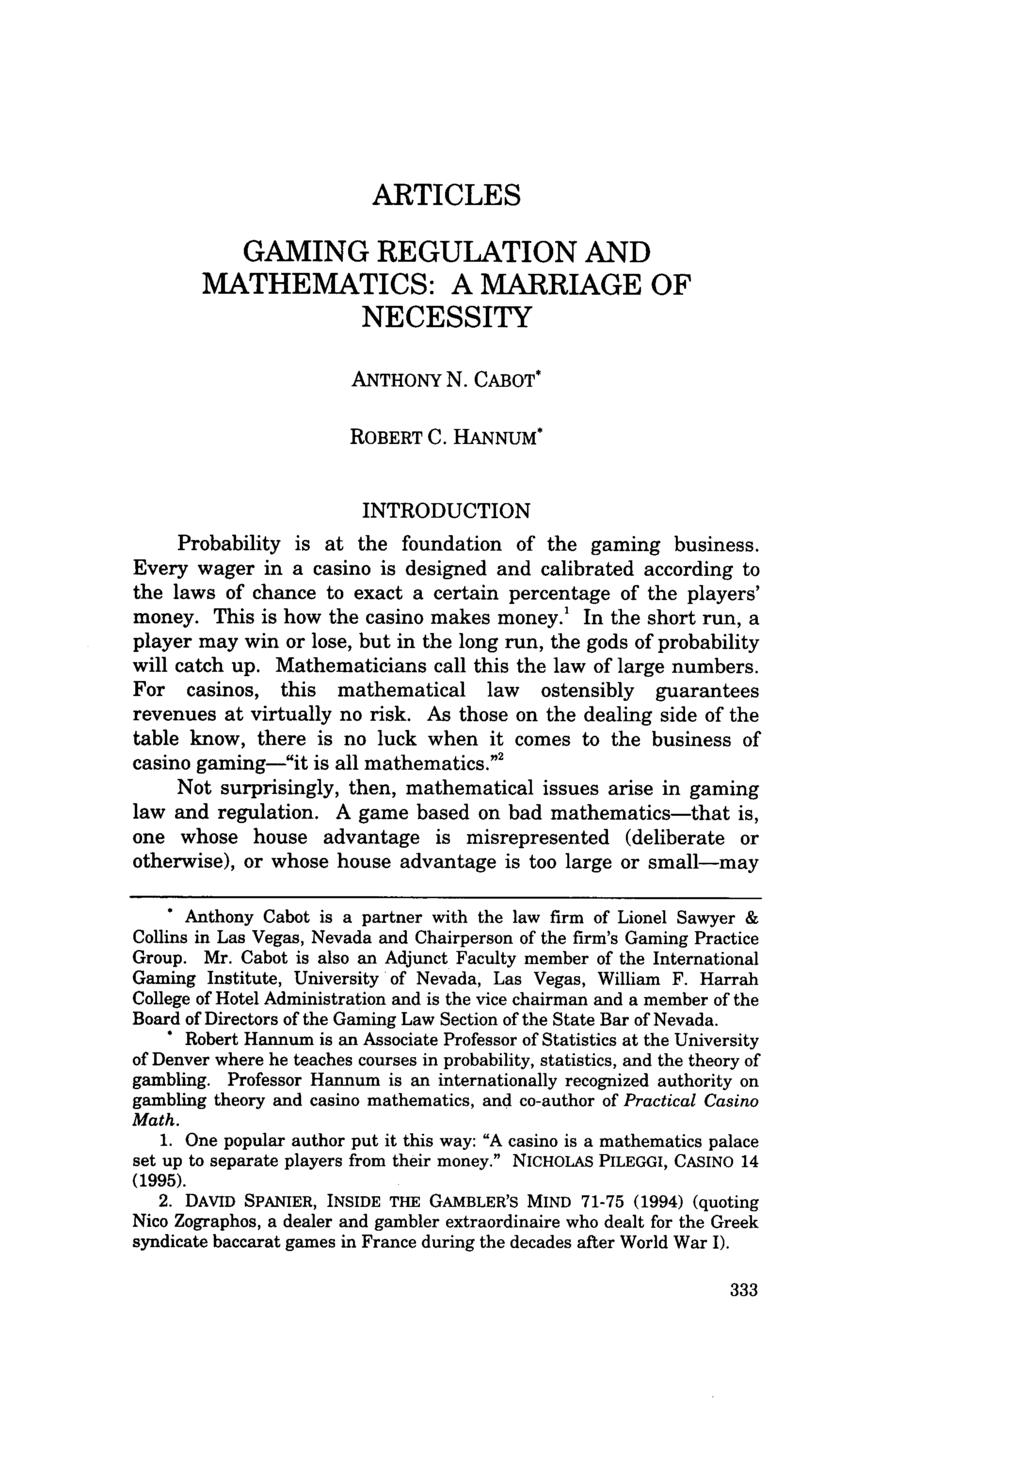 ARTICLES GAMING REGULATION AND MATHEMATICS: A MARRIAGE OF NECESSITY ANTHONY N. CABOT* ROBERT C. HANNUM* INTRODUCTION Probability is at the foundation of the gaming business.